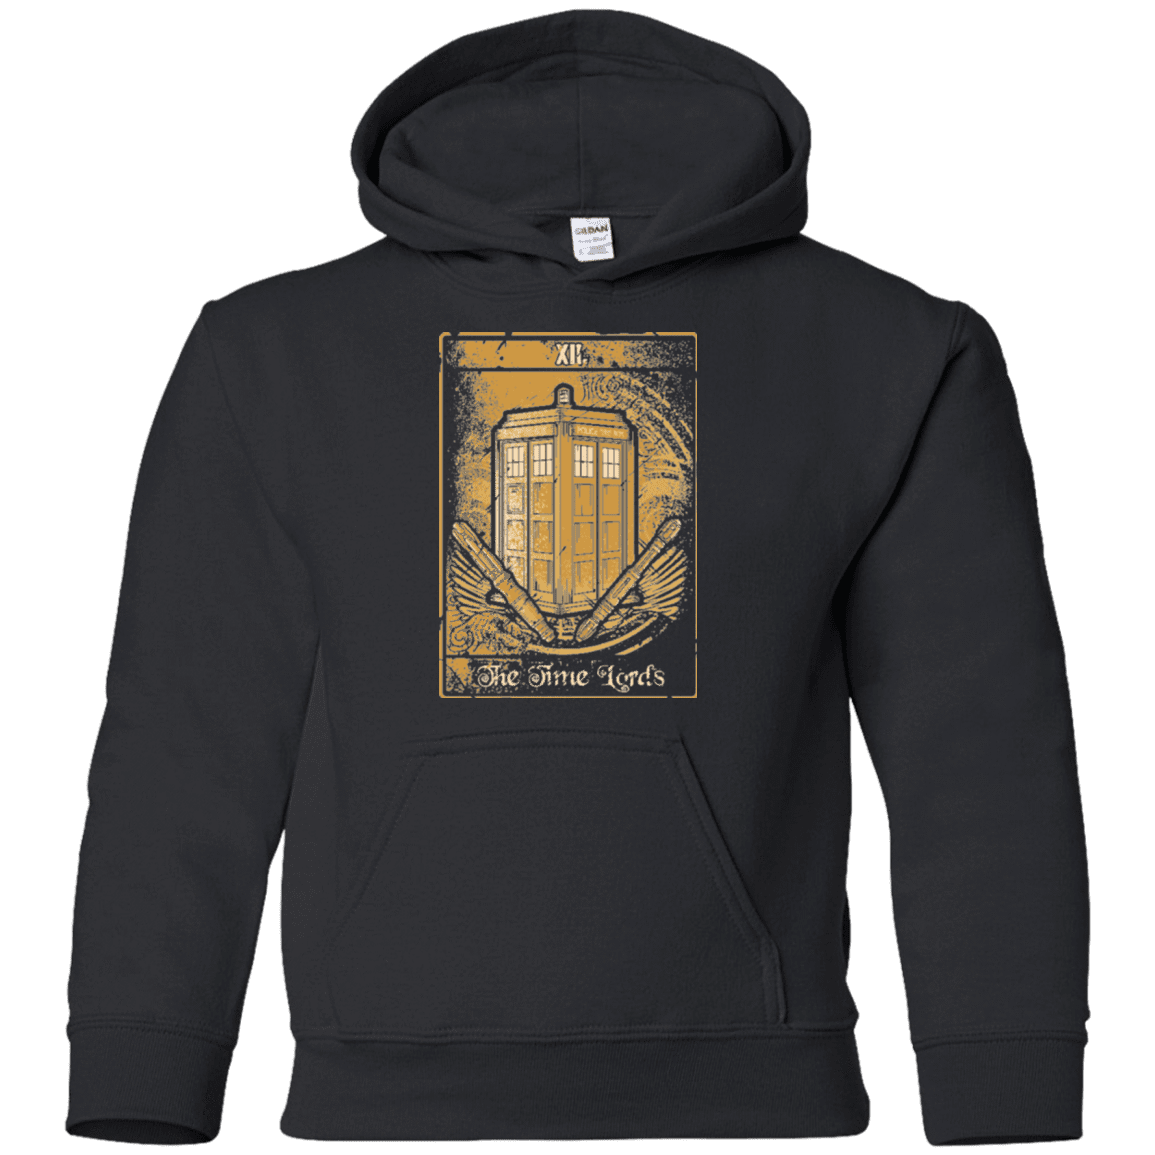 Sweatshirts Black / YS THE TIMELORDS Youth Hoodie